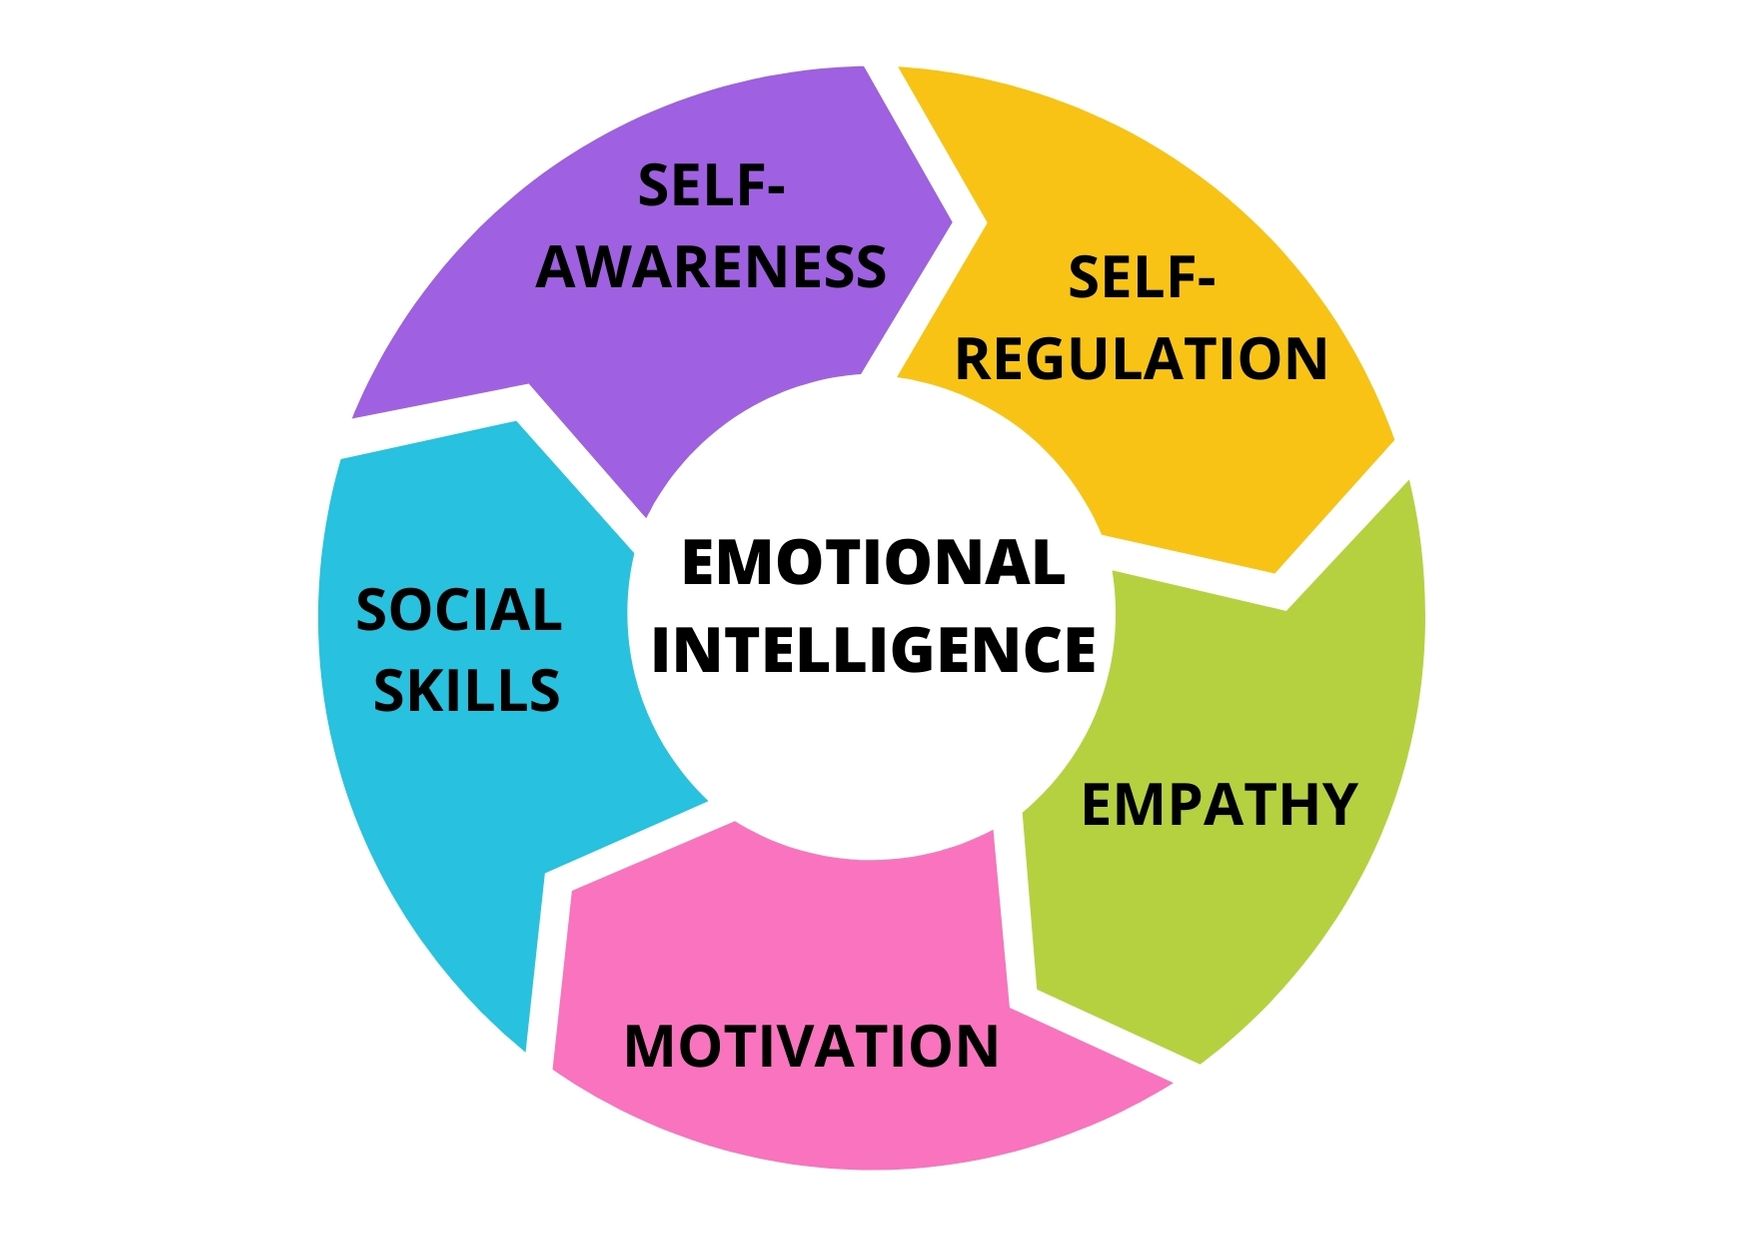 emotional intelligence and human relationships assignment